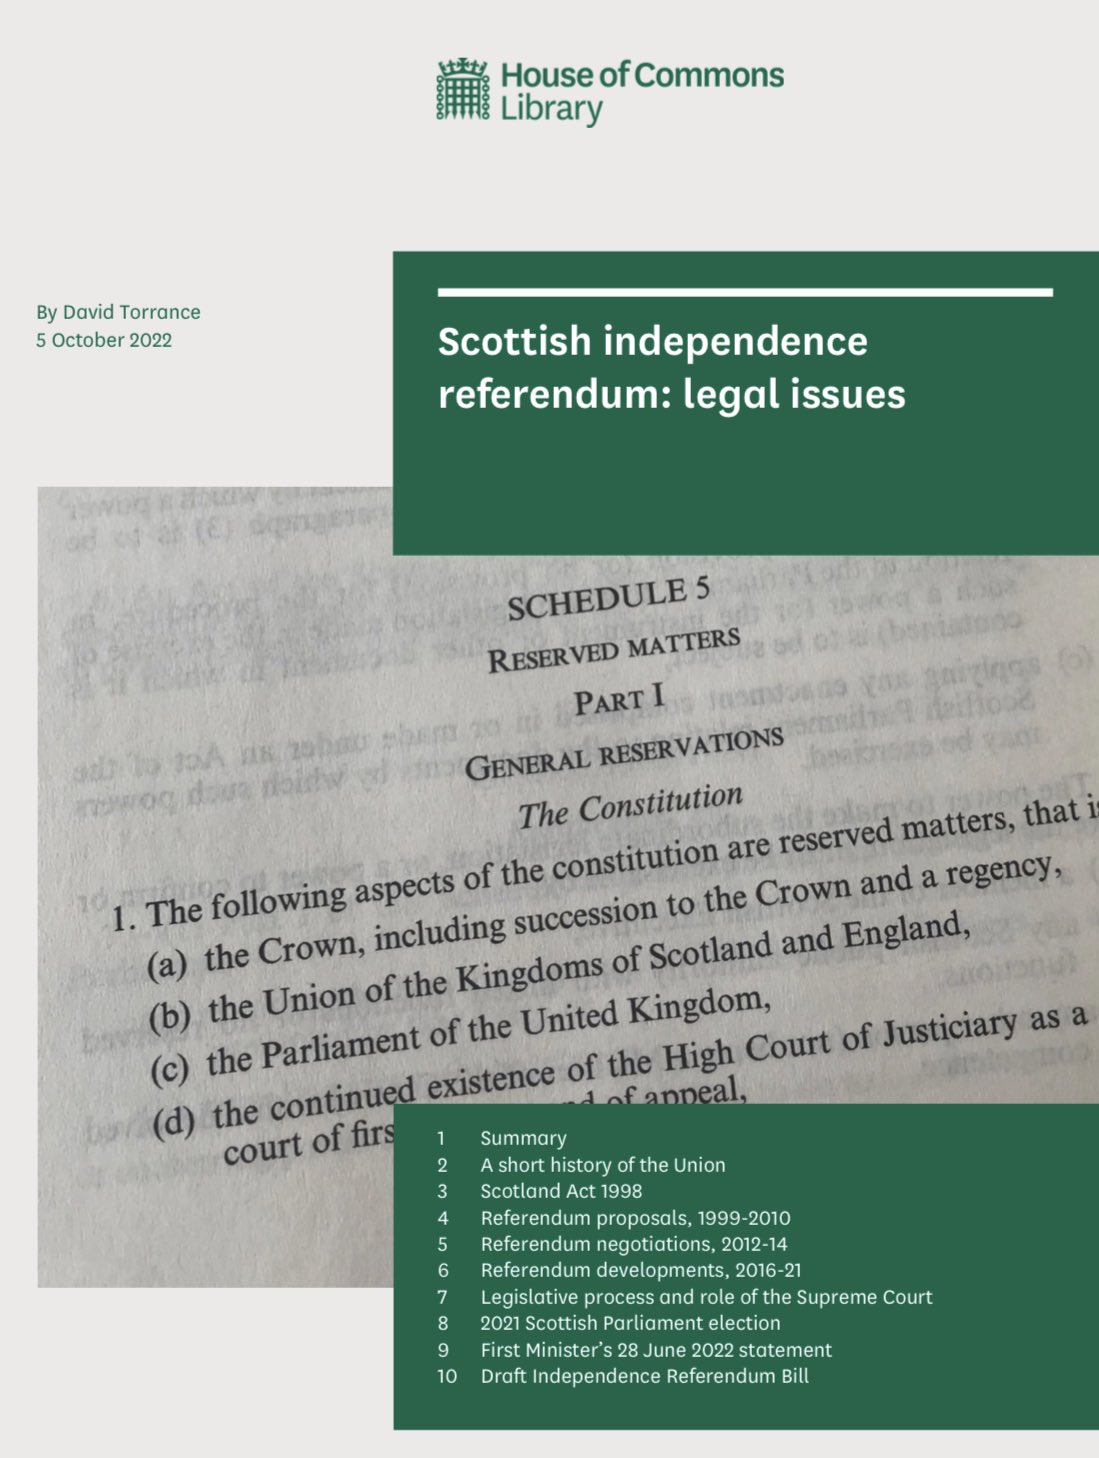 David Torrance on Twitter: "I updated this last week, a @commonslibrary  briefing paper on the legal issues surrounding #indyref2; it includes  analysis of the Scotland Act 1998 as well as subsequent developments -